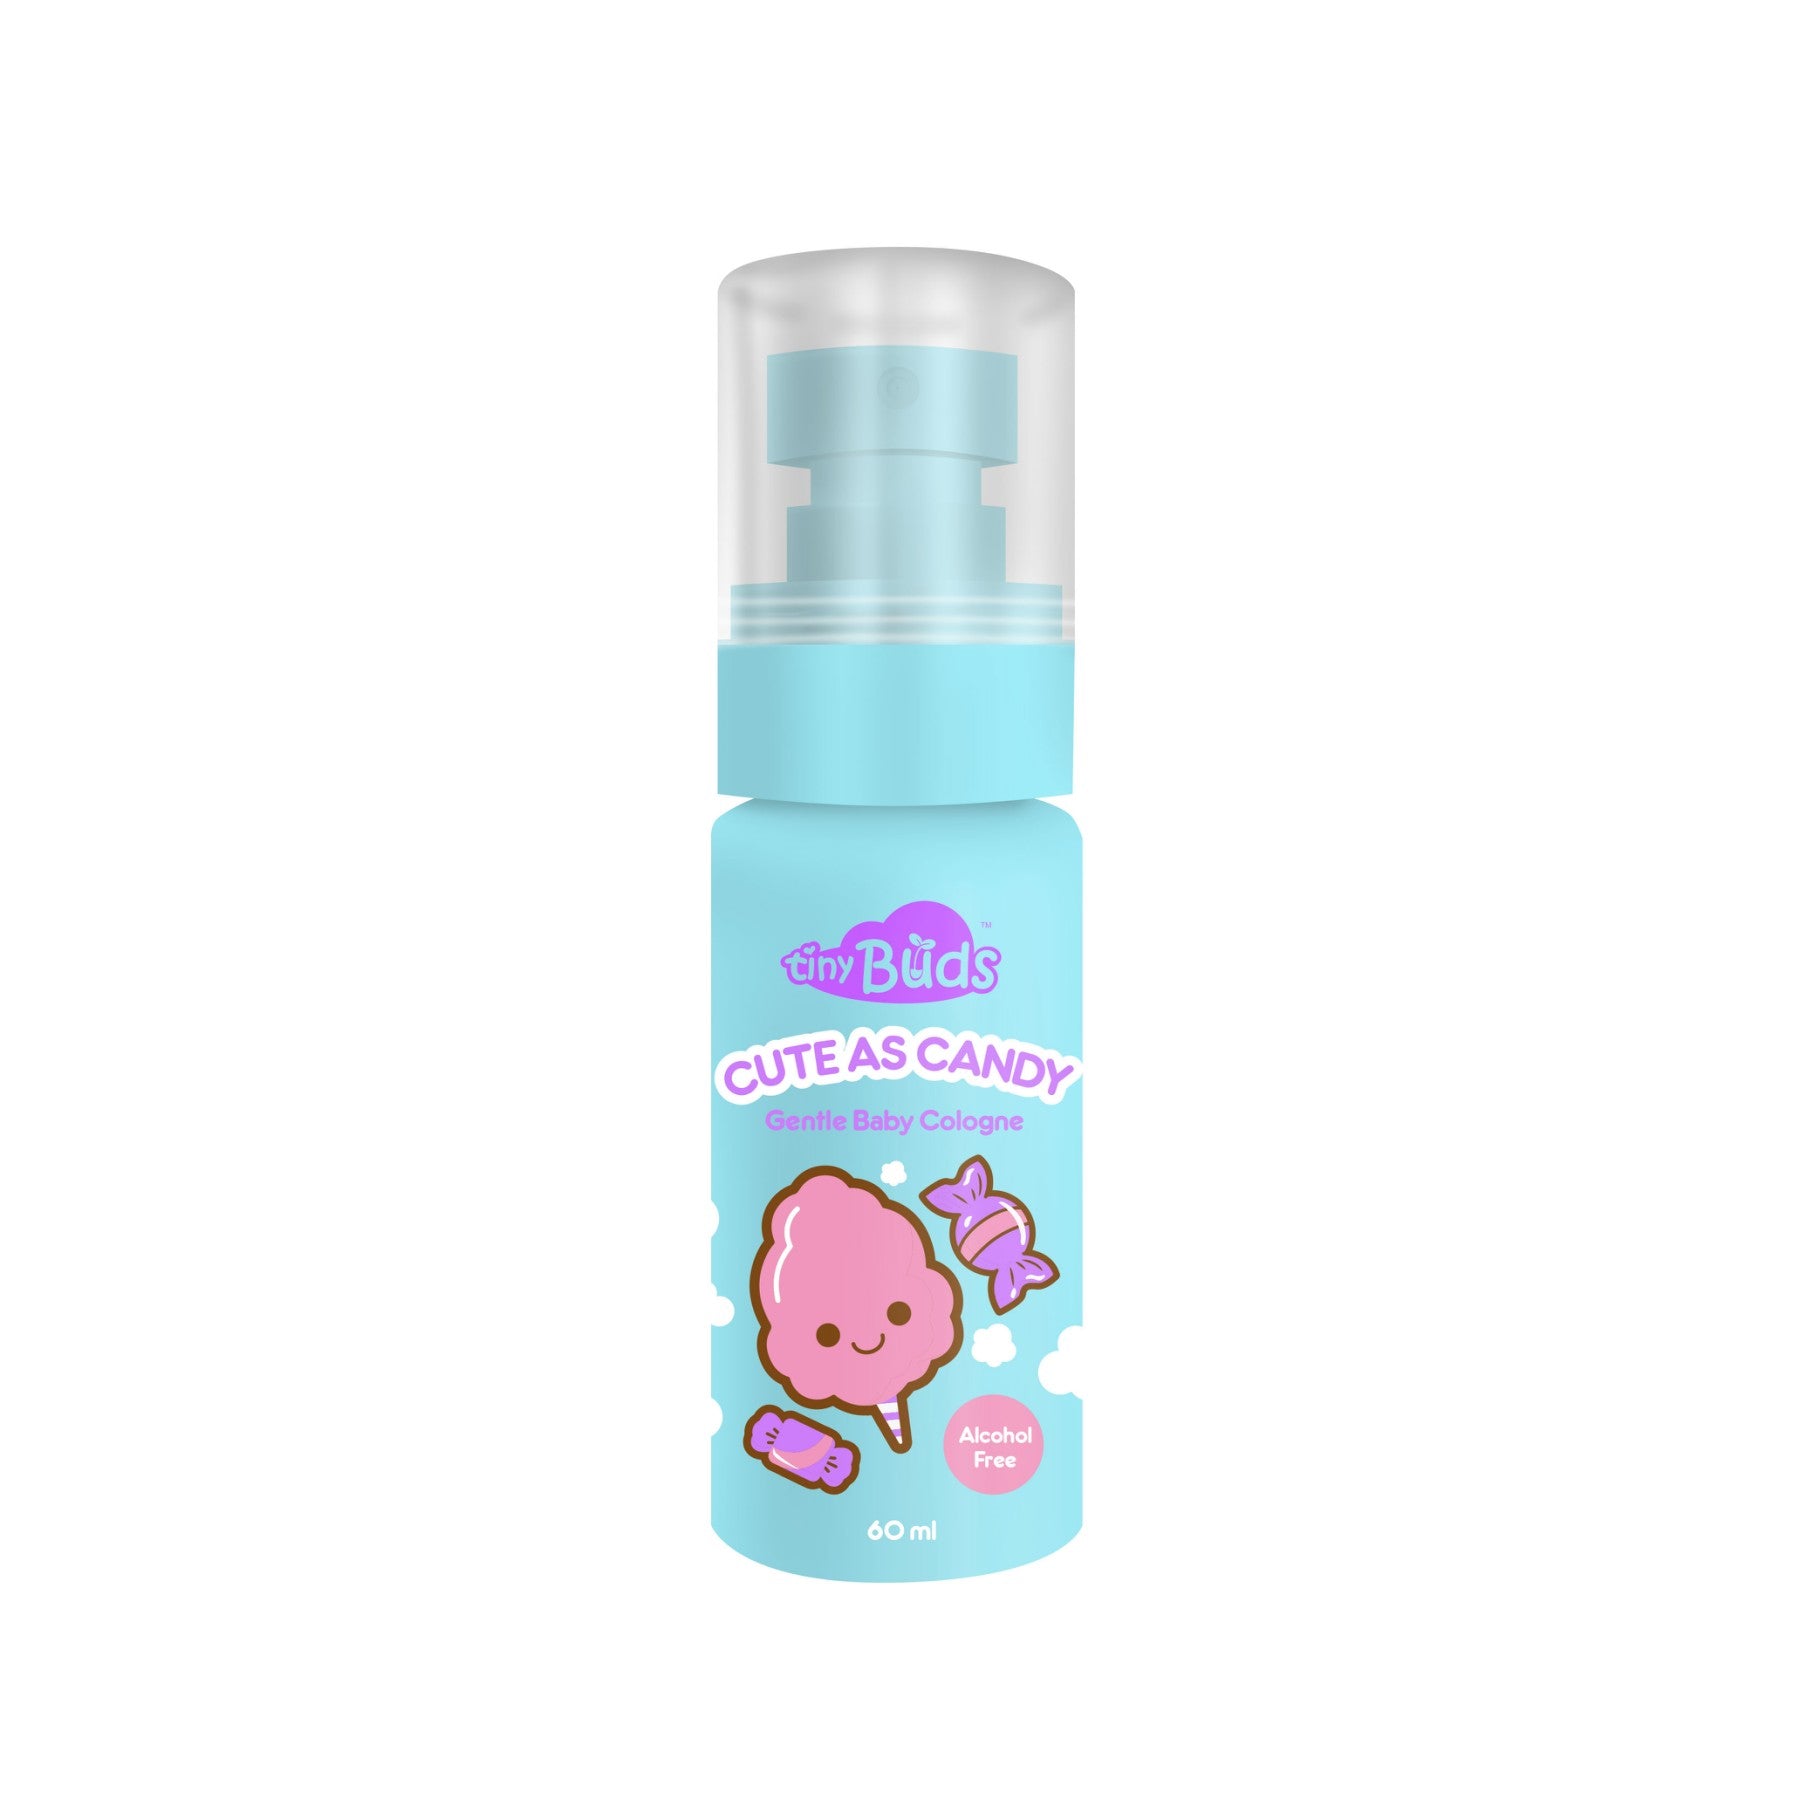 Tiny Buds Cute As Candy Gentle Baby Cologne